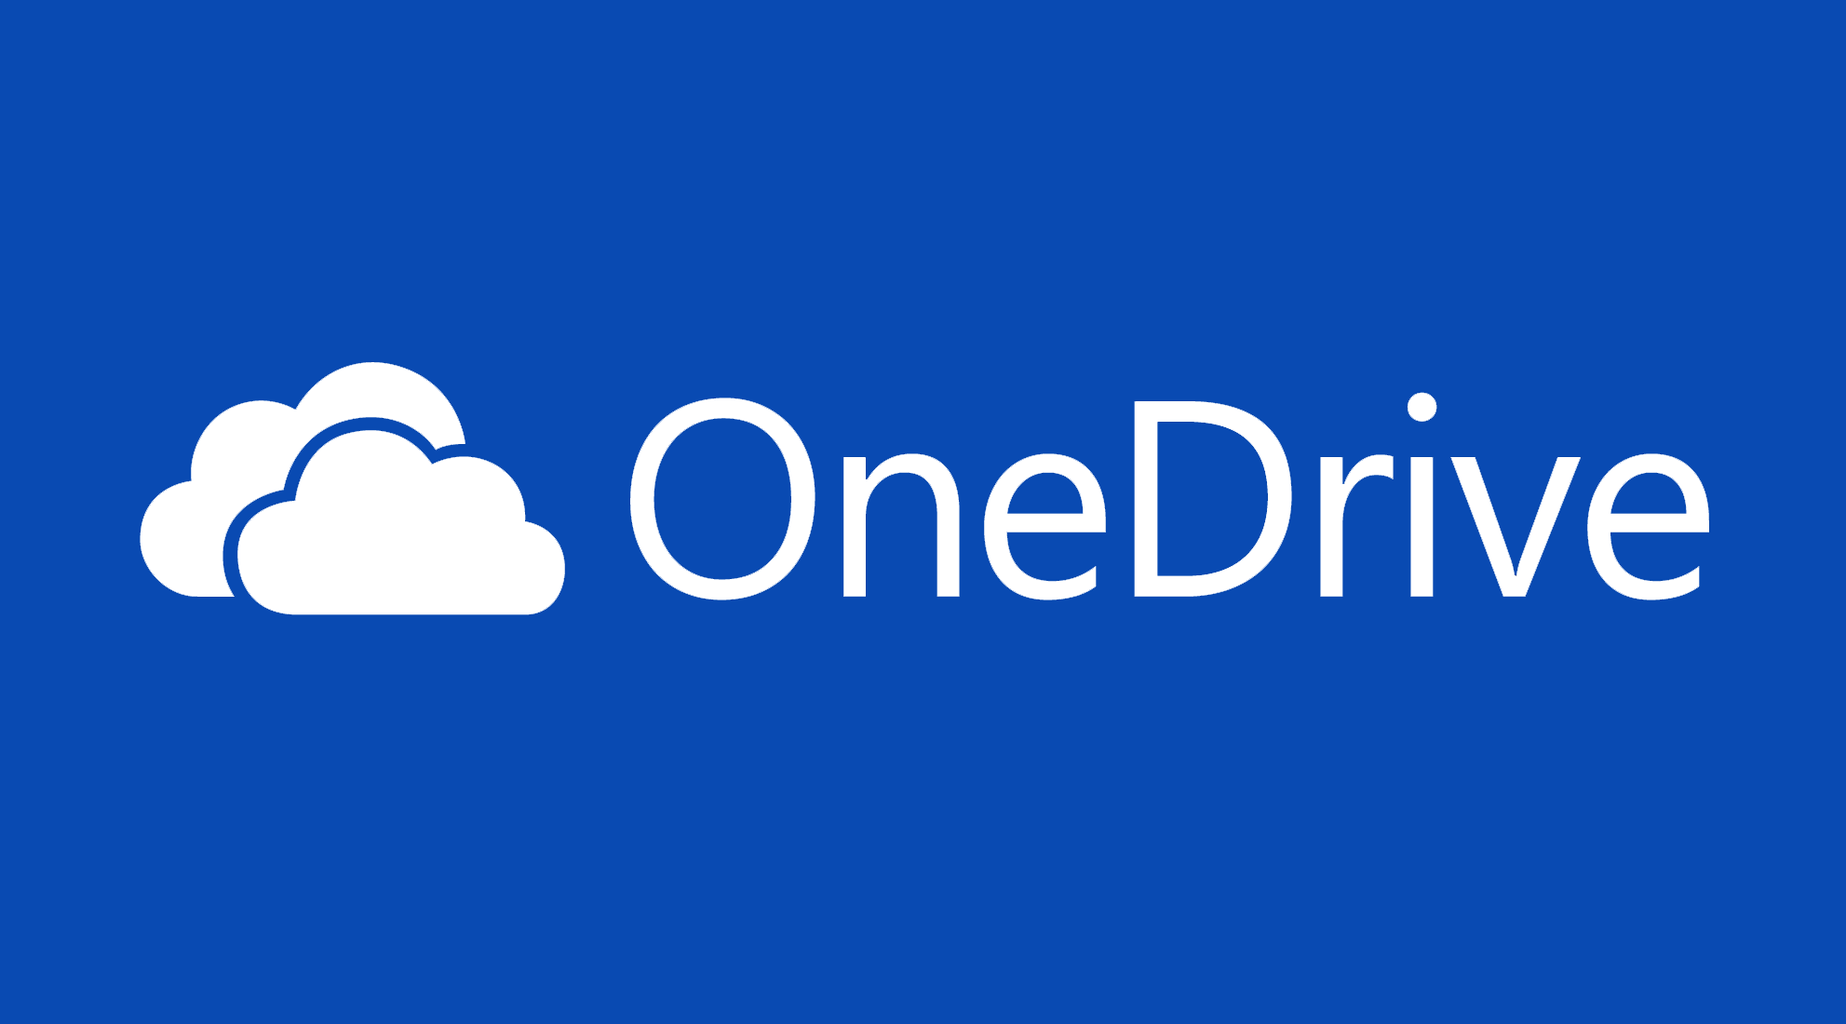 NTFS Logo - OneDrive now requires the use of NTFS drives